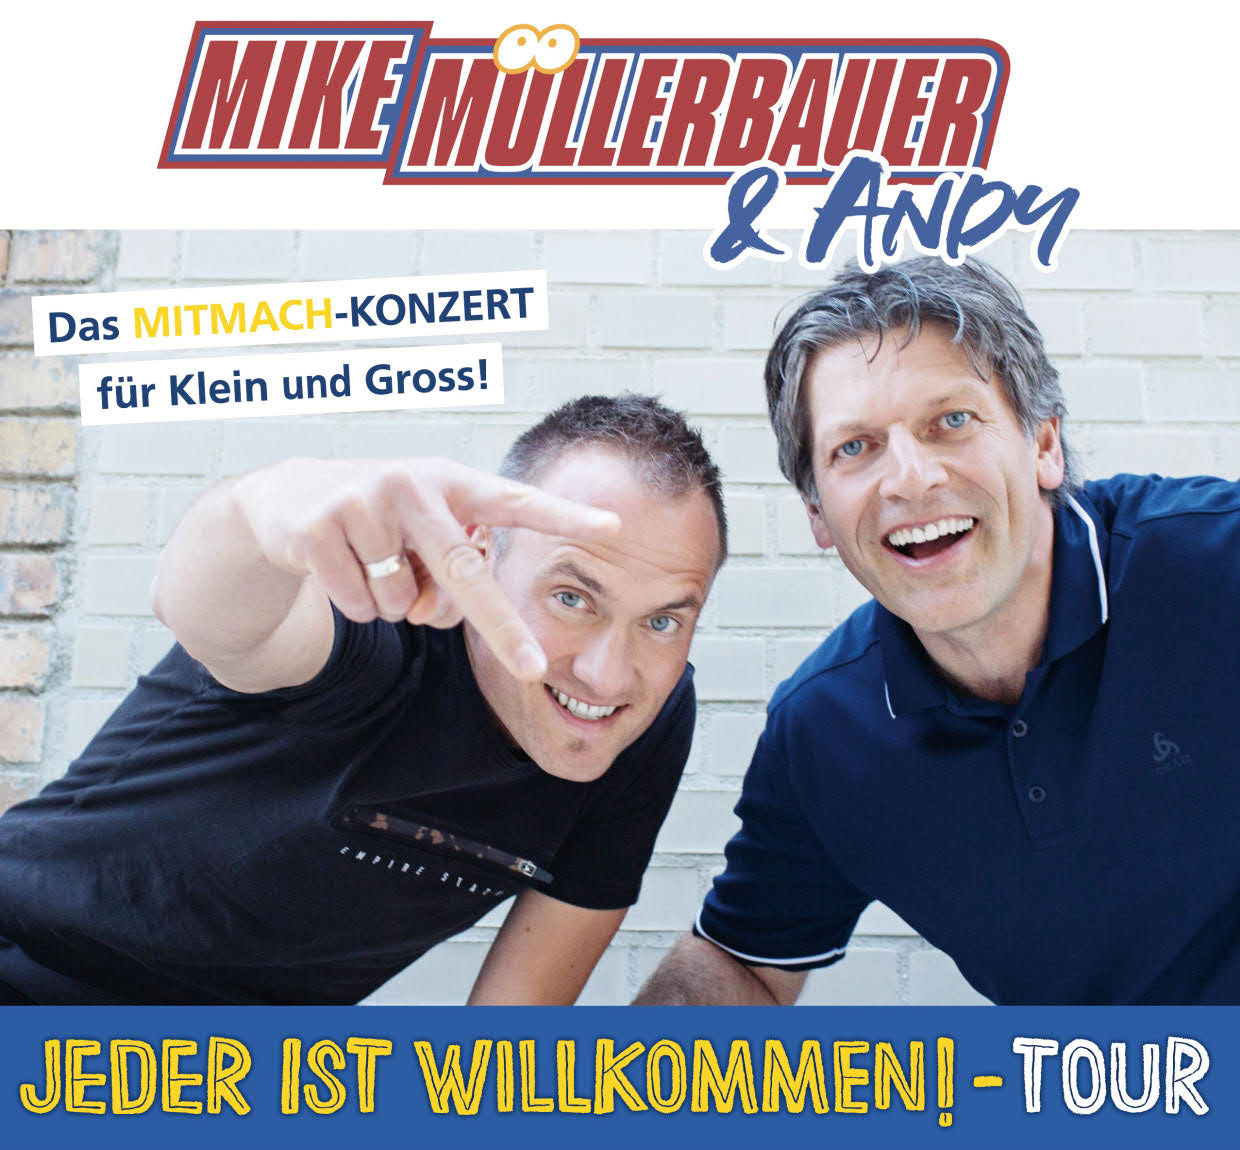 Mike Muellerbauer + Andy